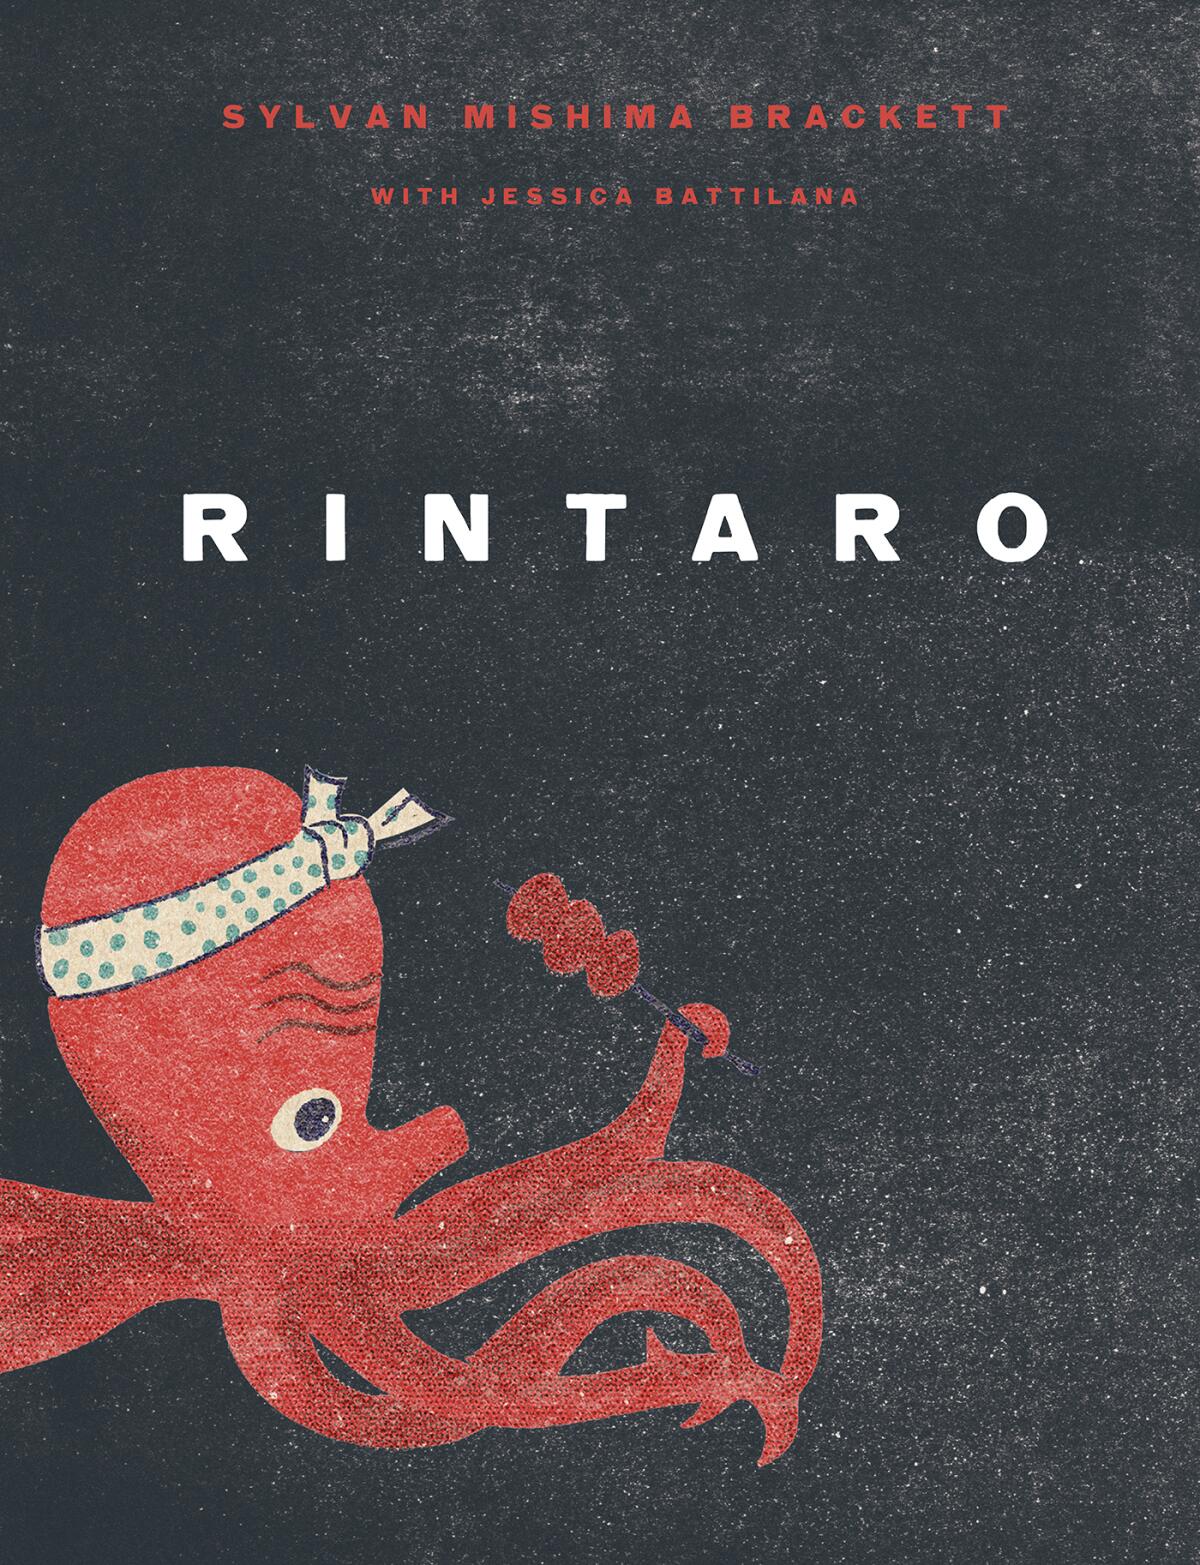 A cover of Rintaro cookbook: An illustrated red octopus holds a kushiyaki skewer against a black background